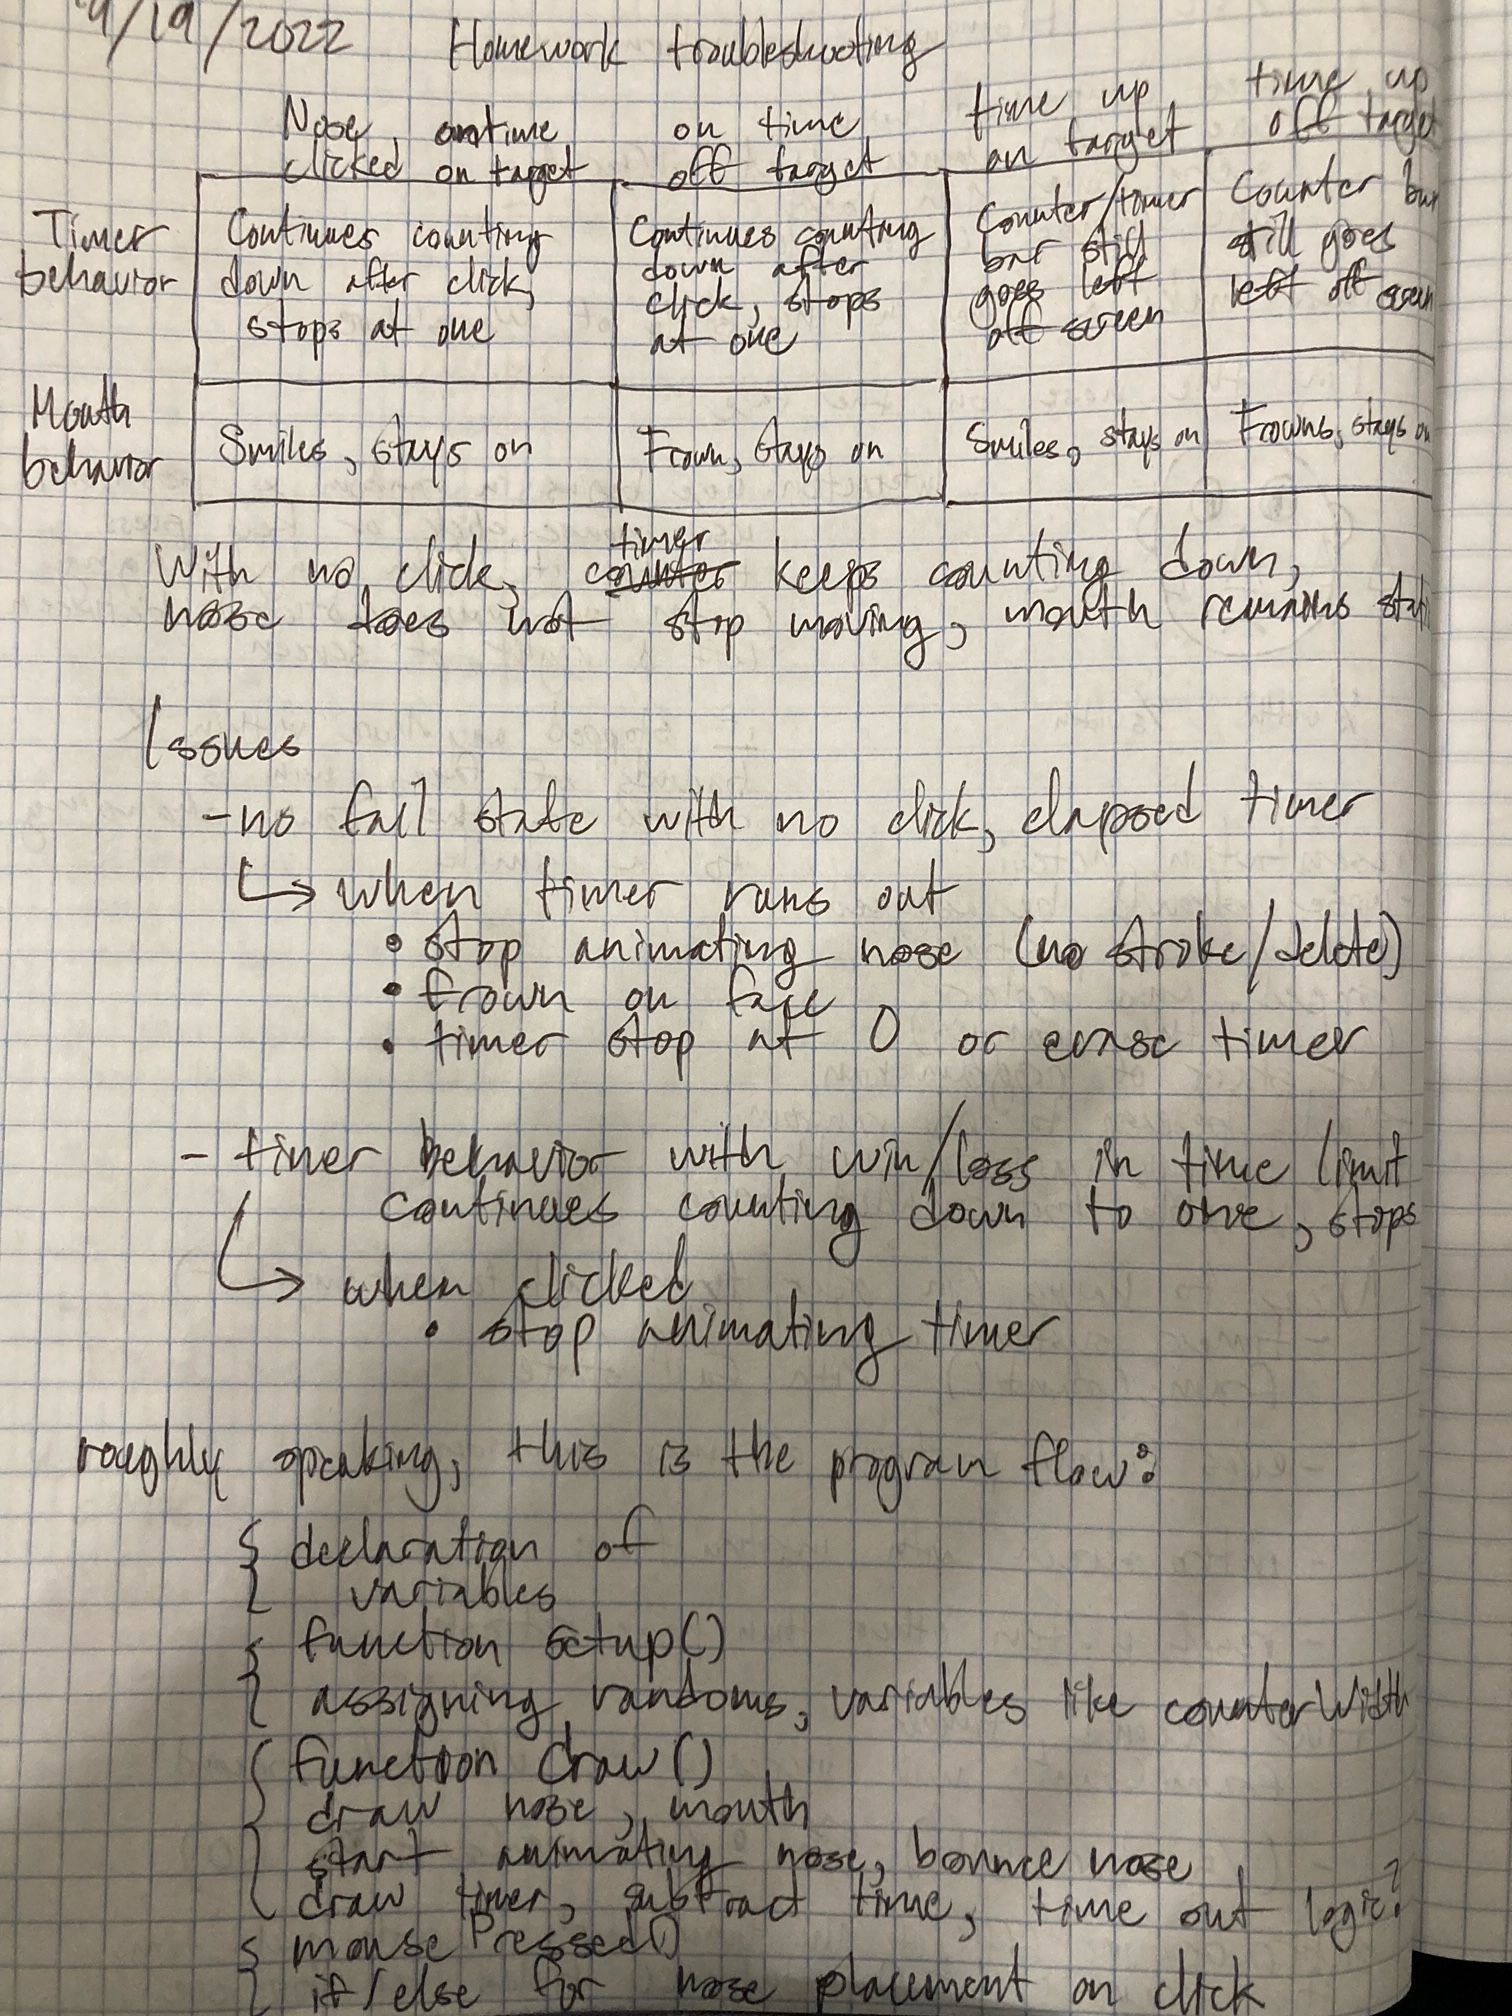 A page of debugging information in my ICM notebook.